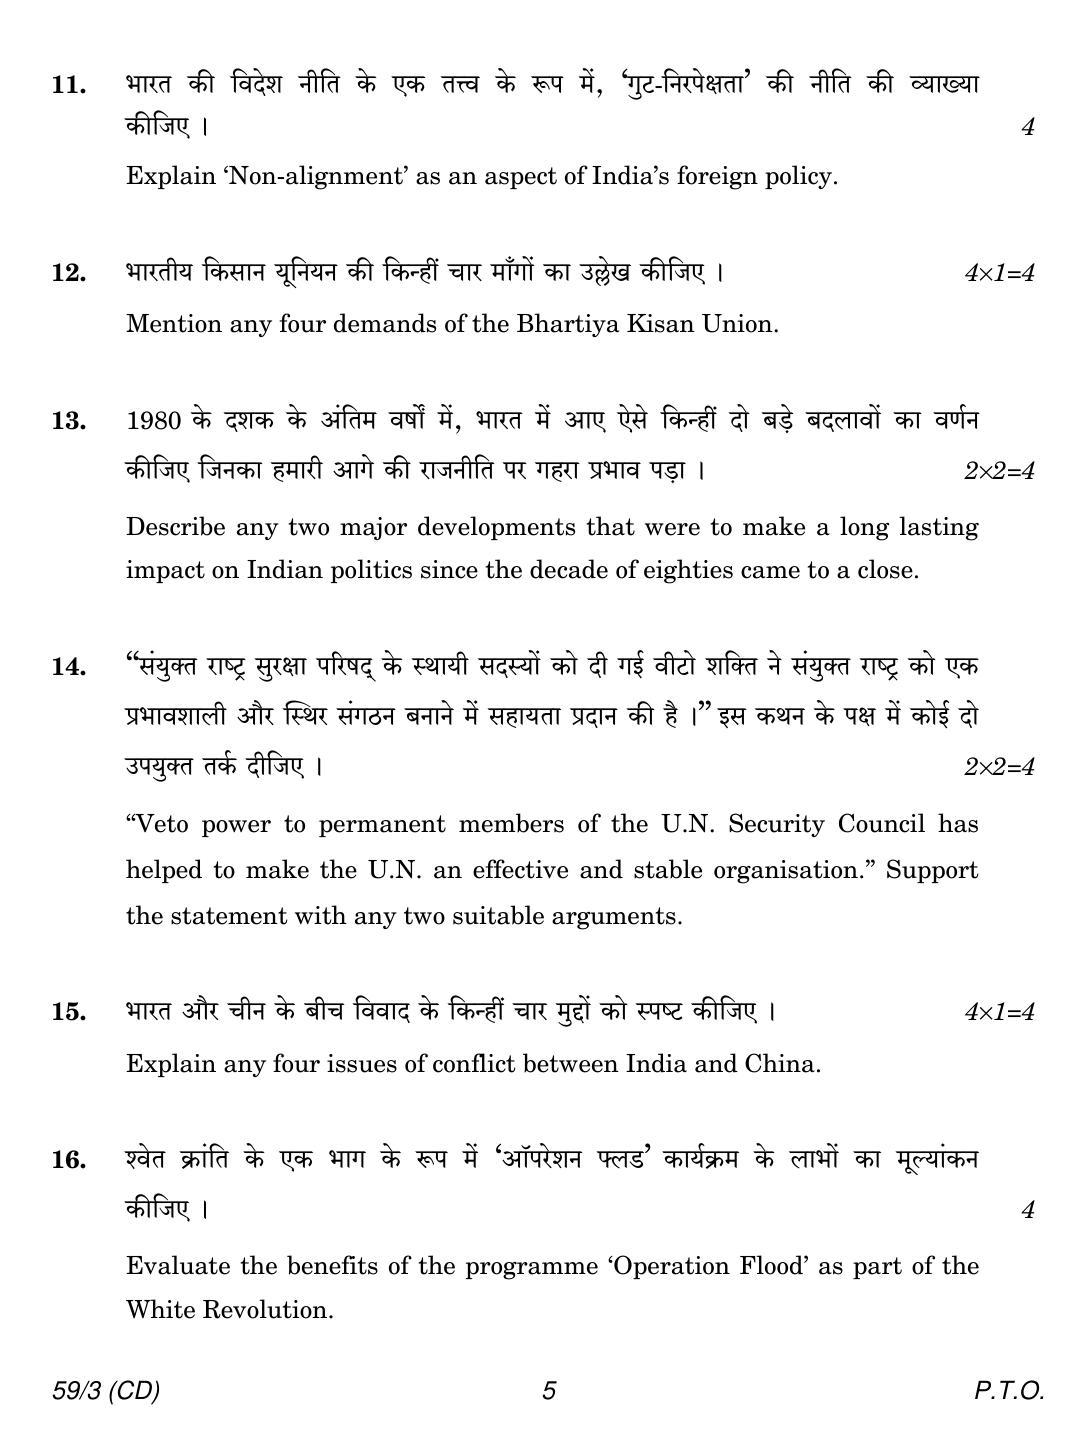 CBSE Class 12 59-3 POLITICAL SCIENCE CD 2018 Question Paper - Page 5